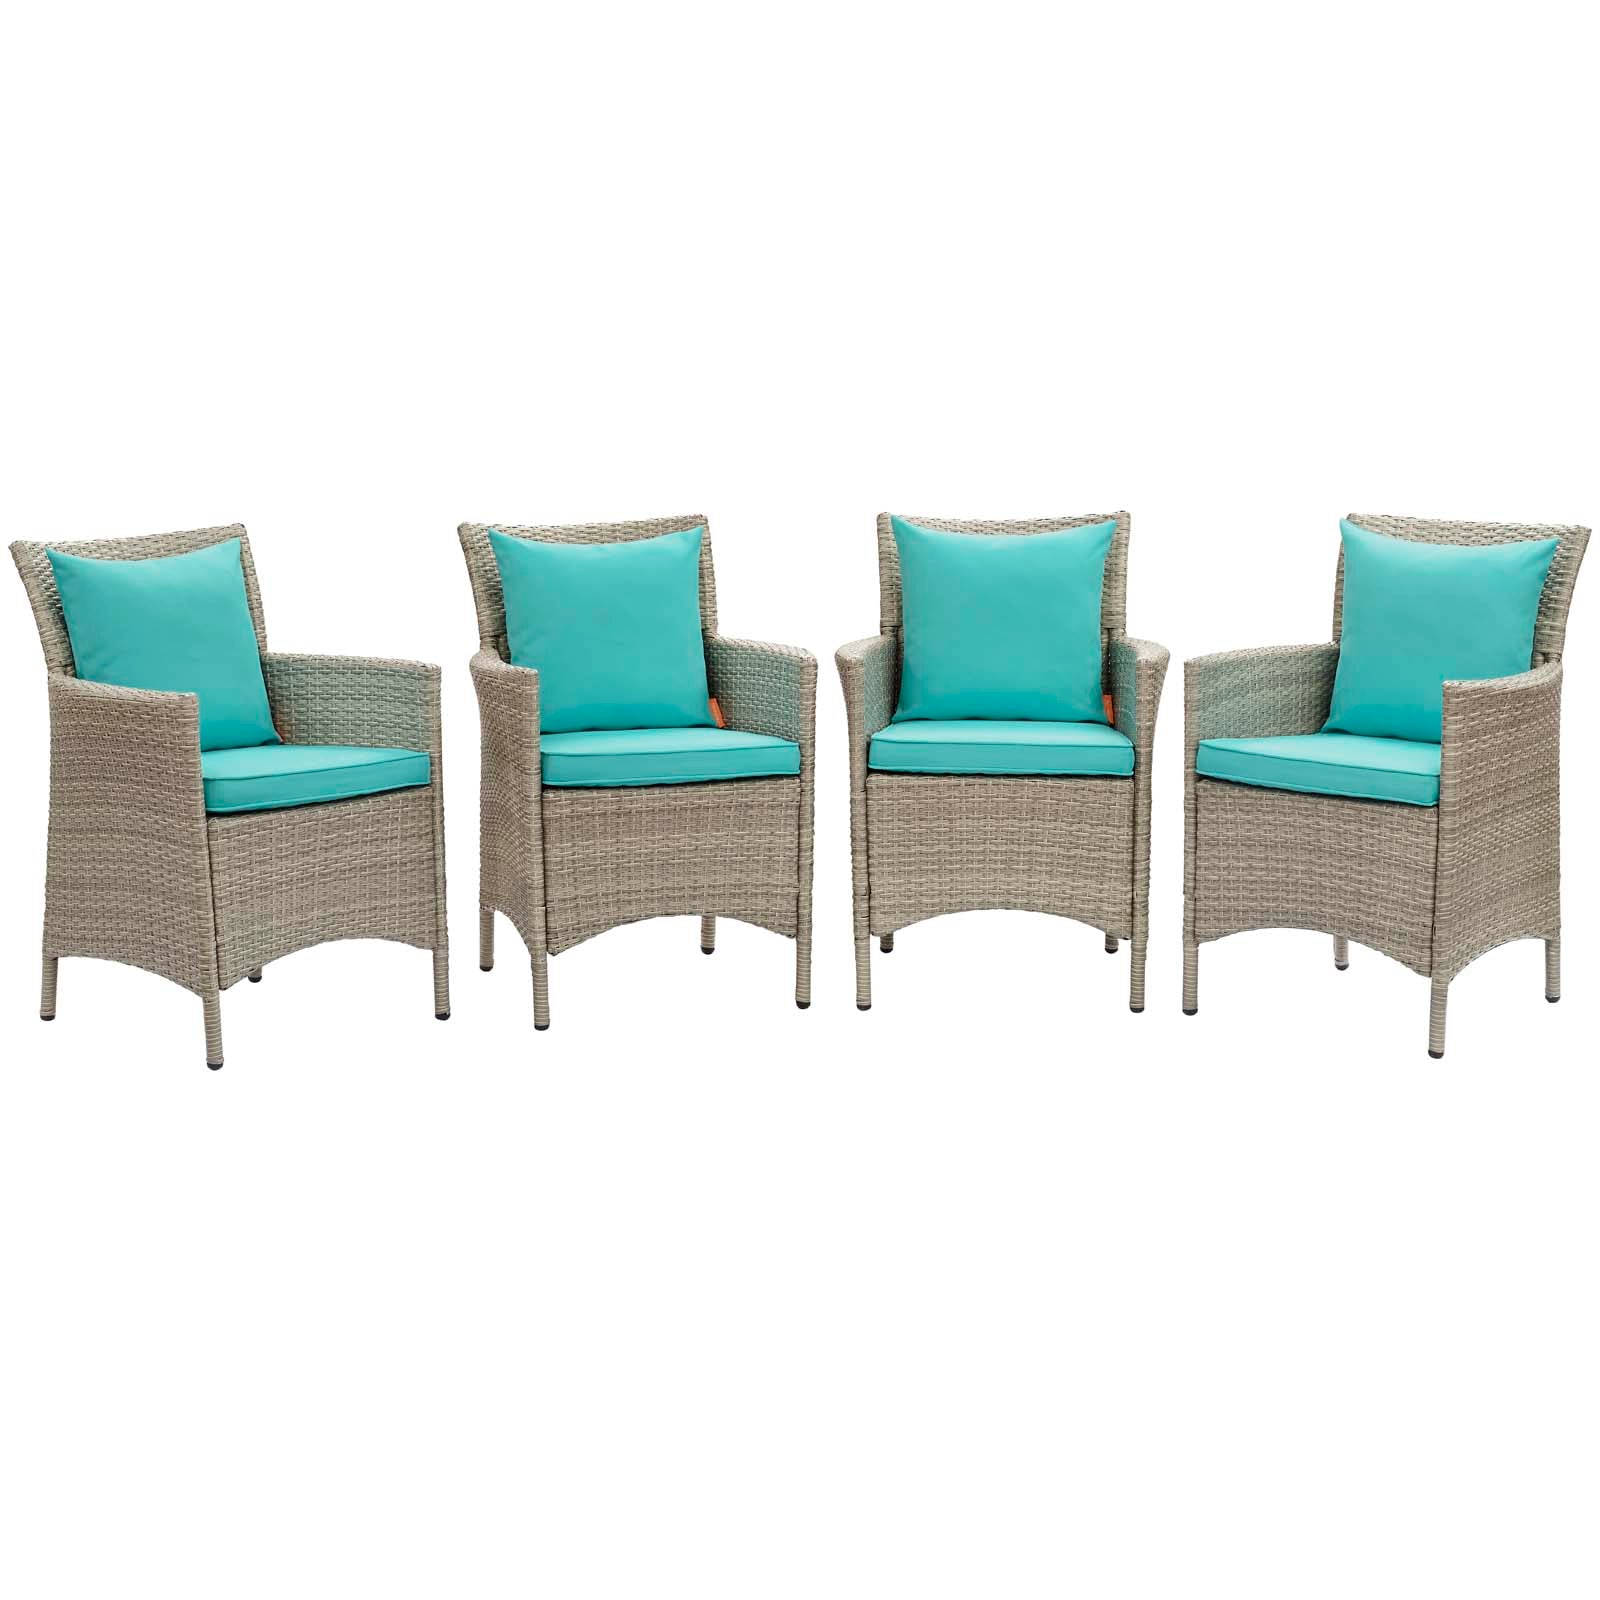 Modway Outdoor Dining Chairs - Conduit Outdoor Patio Wicker Rattan Dining Armchair Set of 4 Light Gray Turquoise